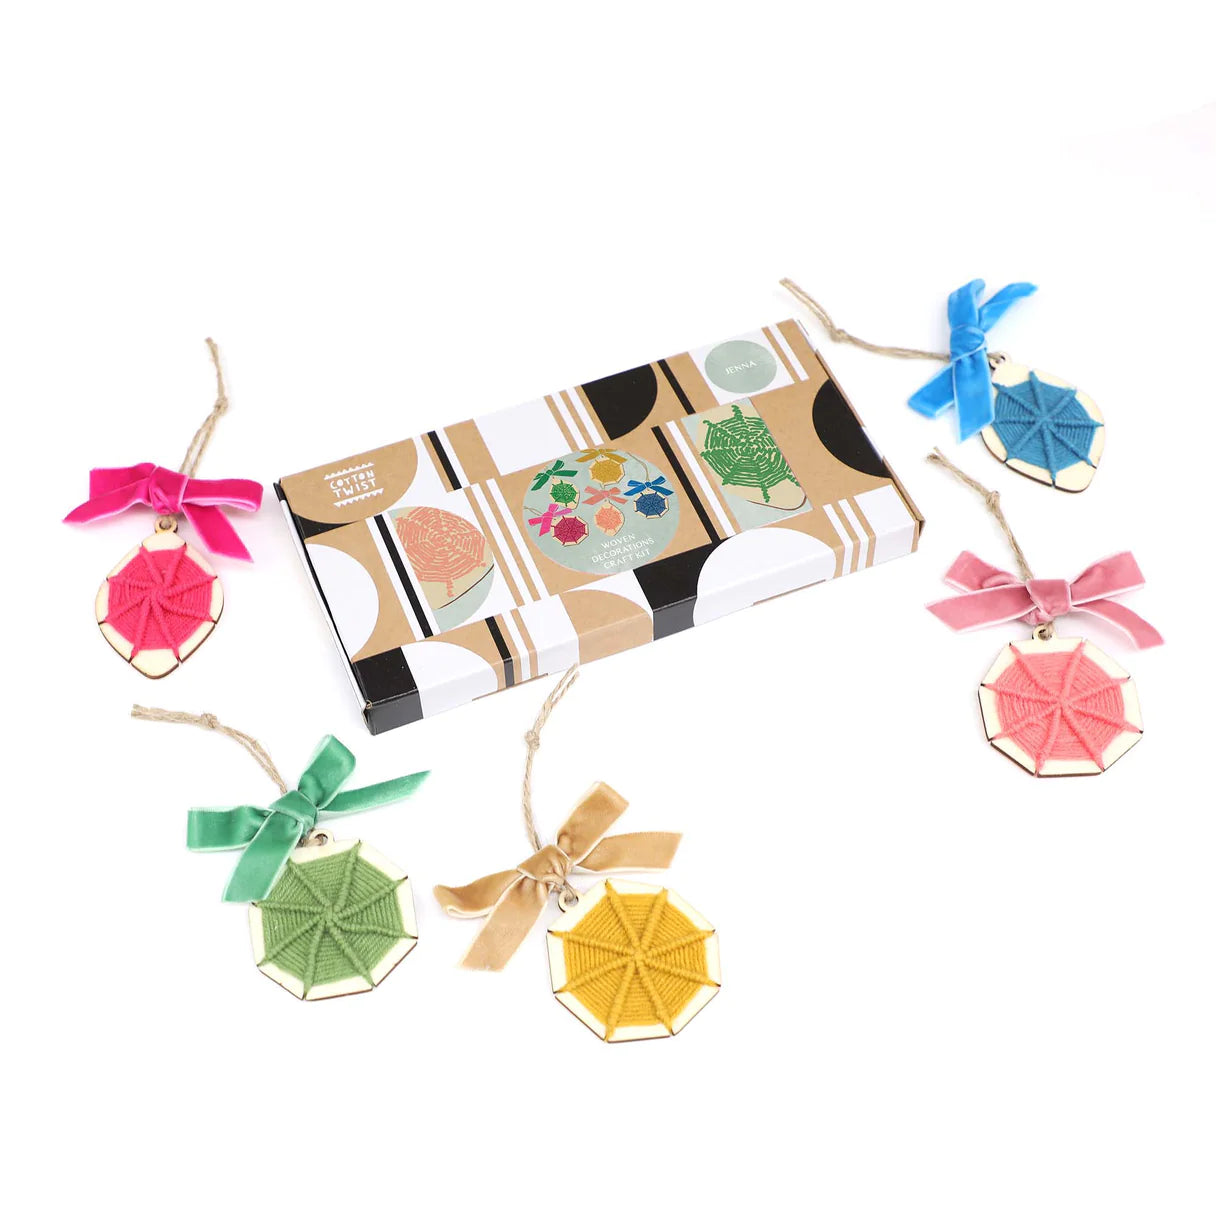 Cotton Twist Wooden Craft Kit - Woven Hanging Decorations - Little Reef and Friends